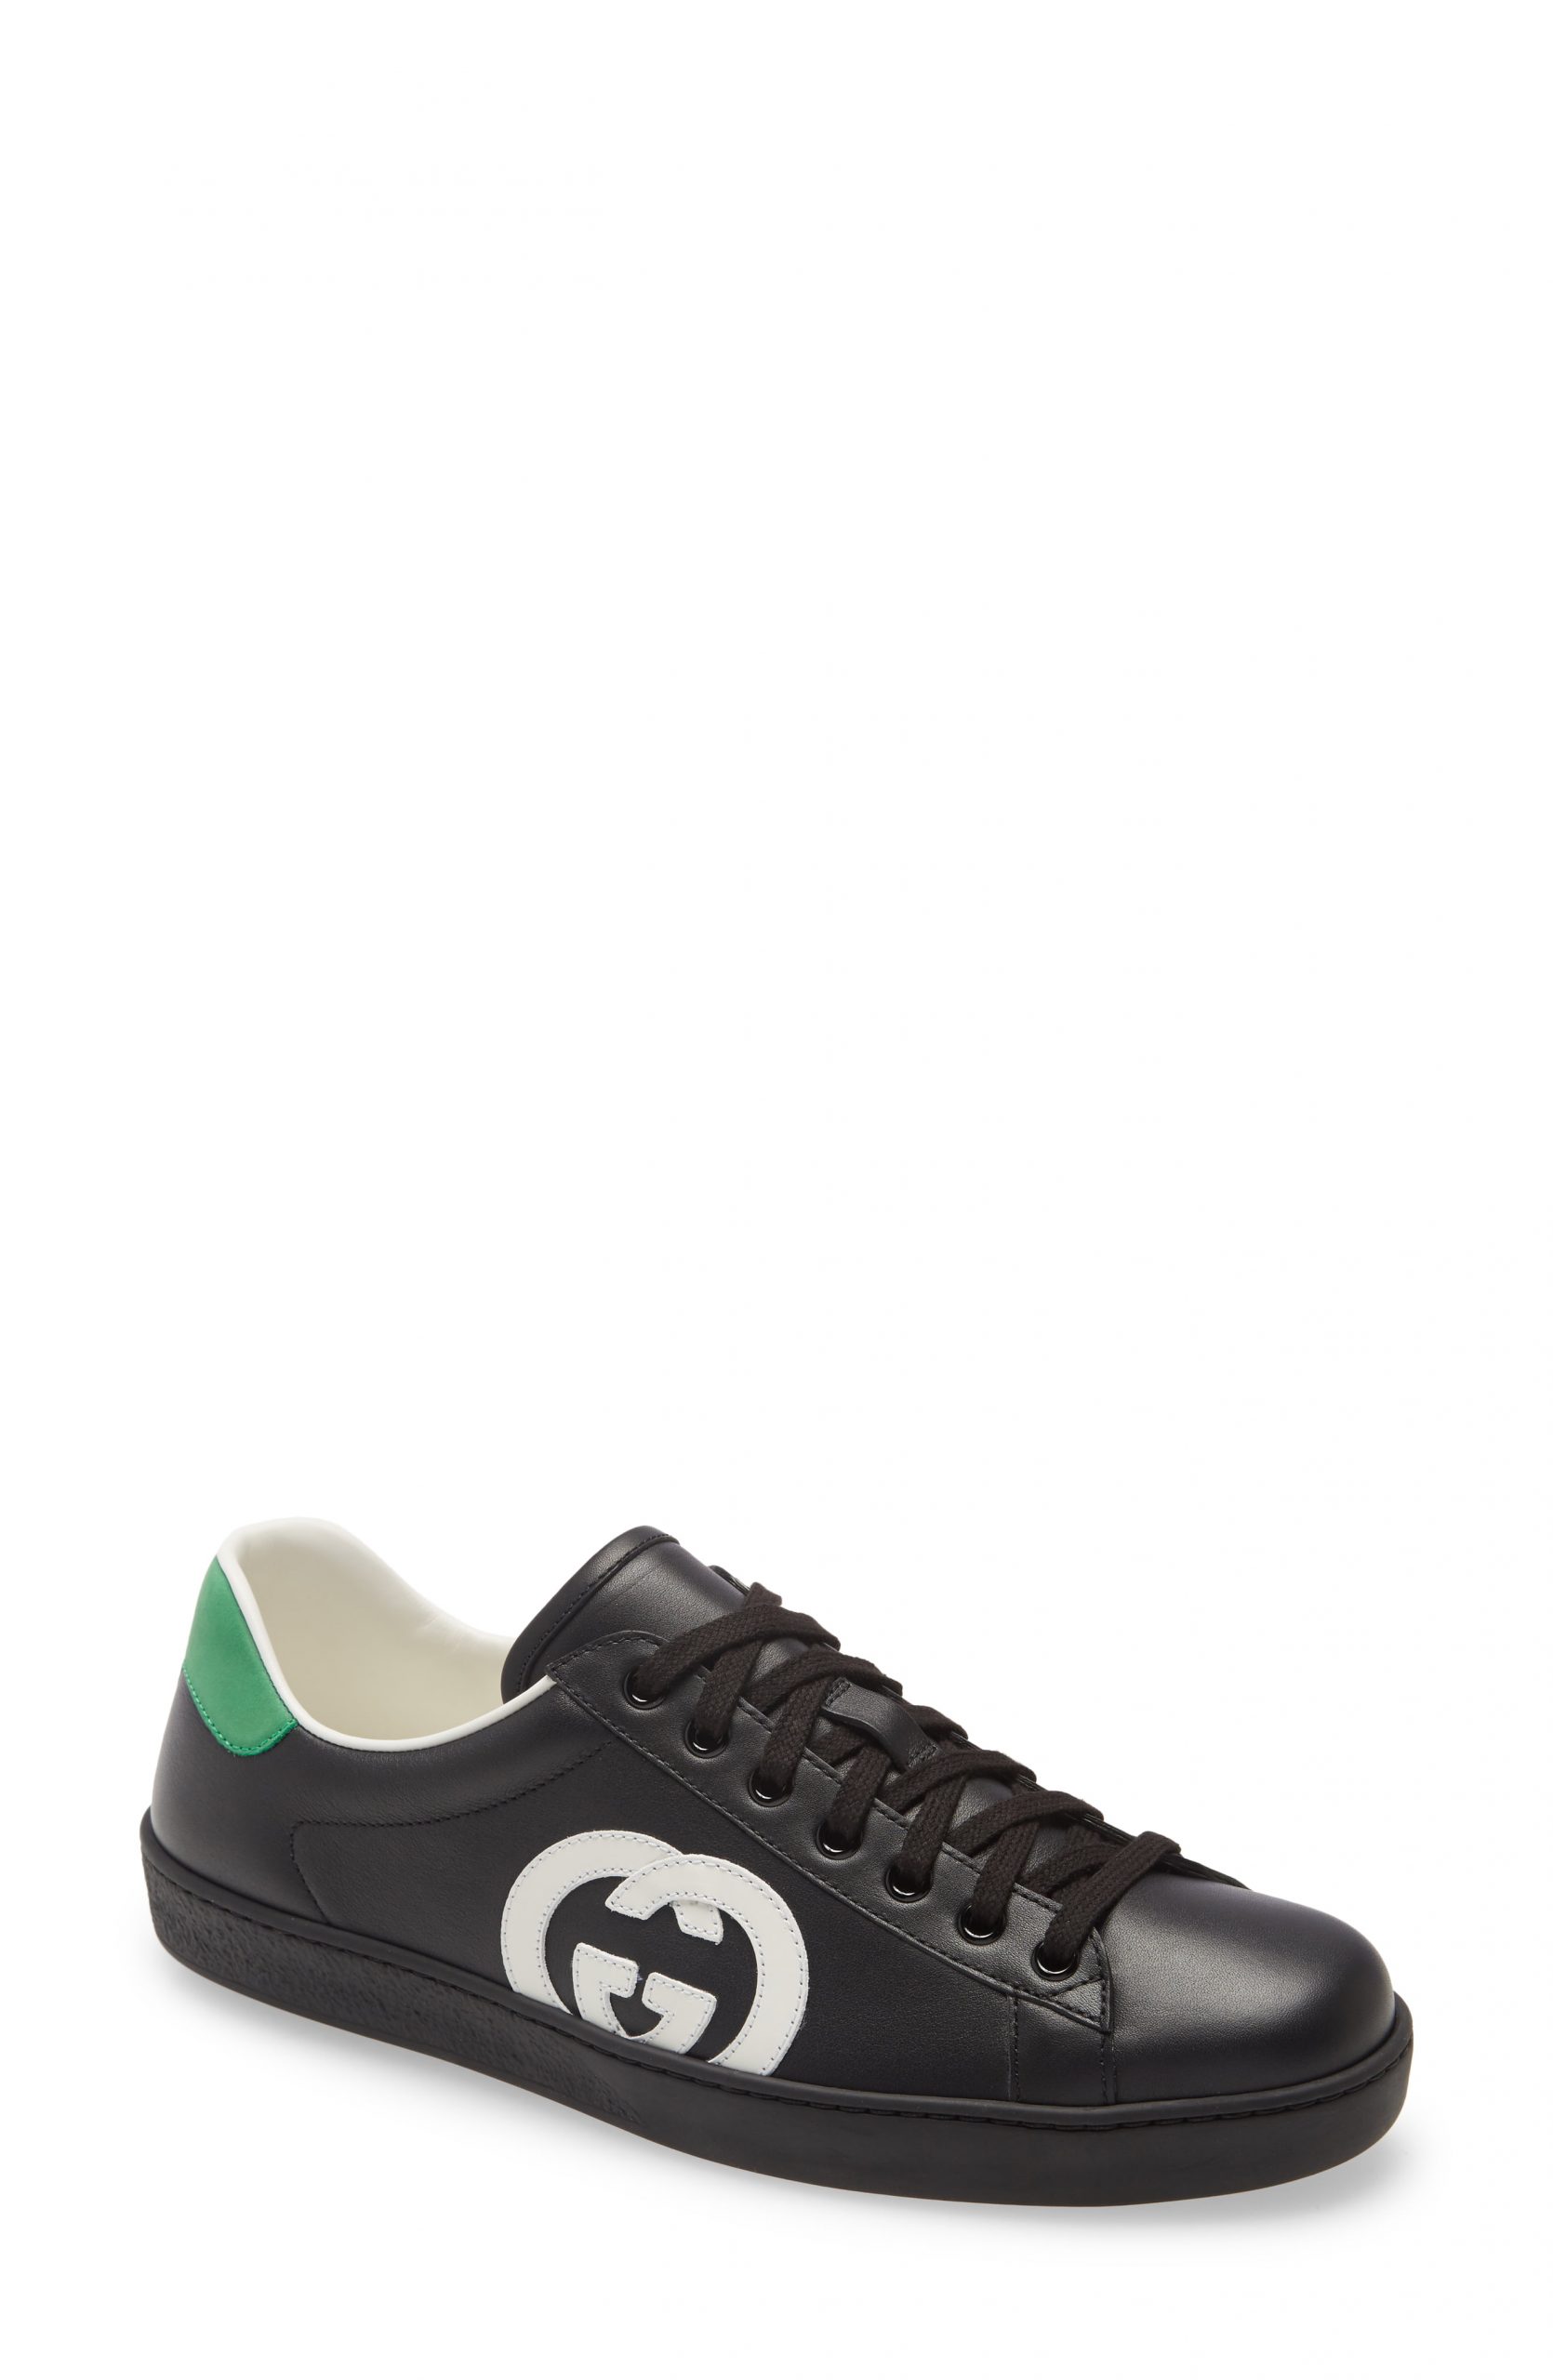 Men’s Gucci New Ace Logo Low Top Sneaker, Size 10US - Black | The ...